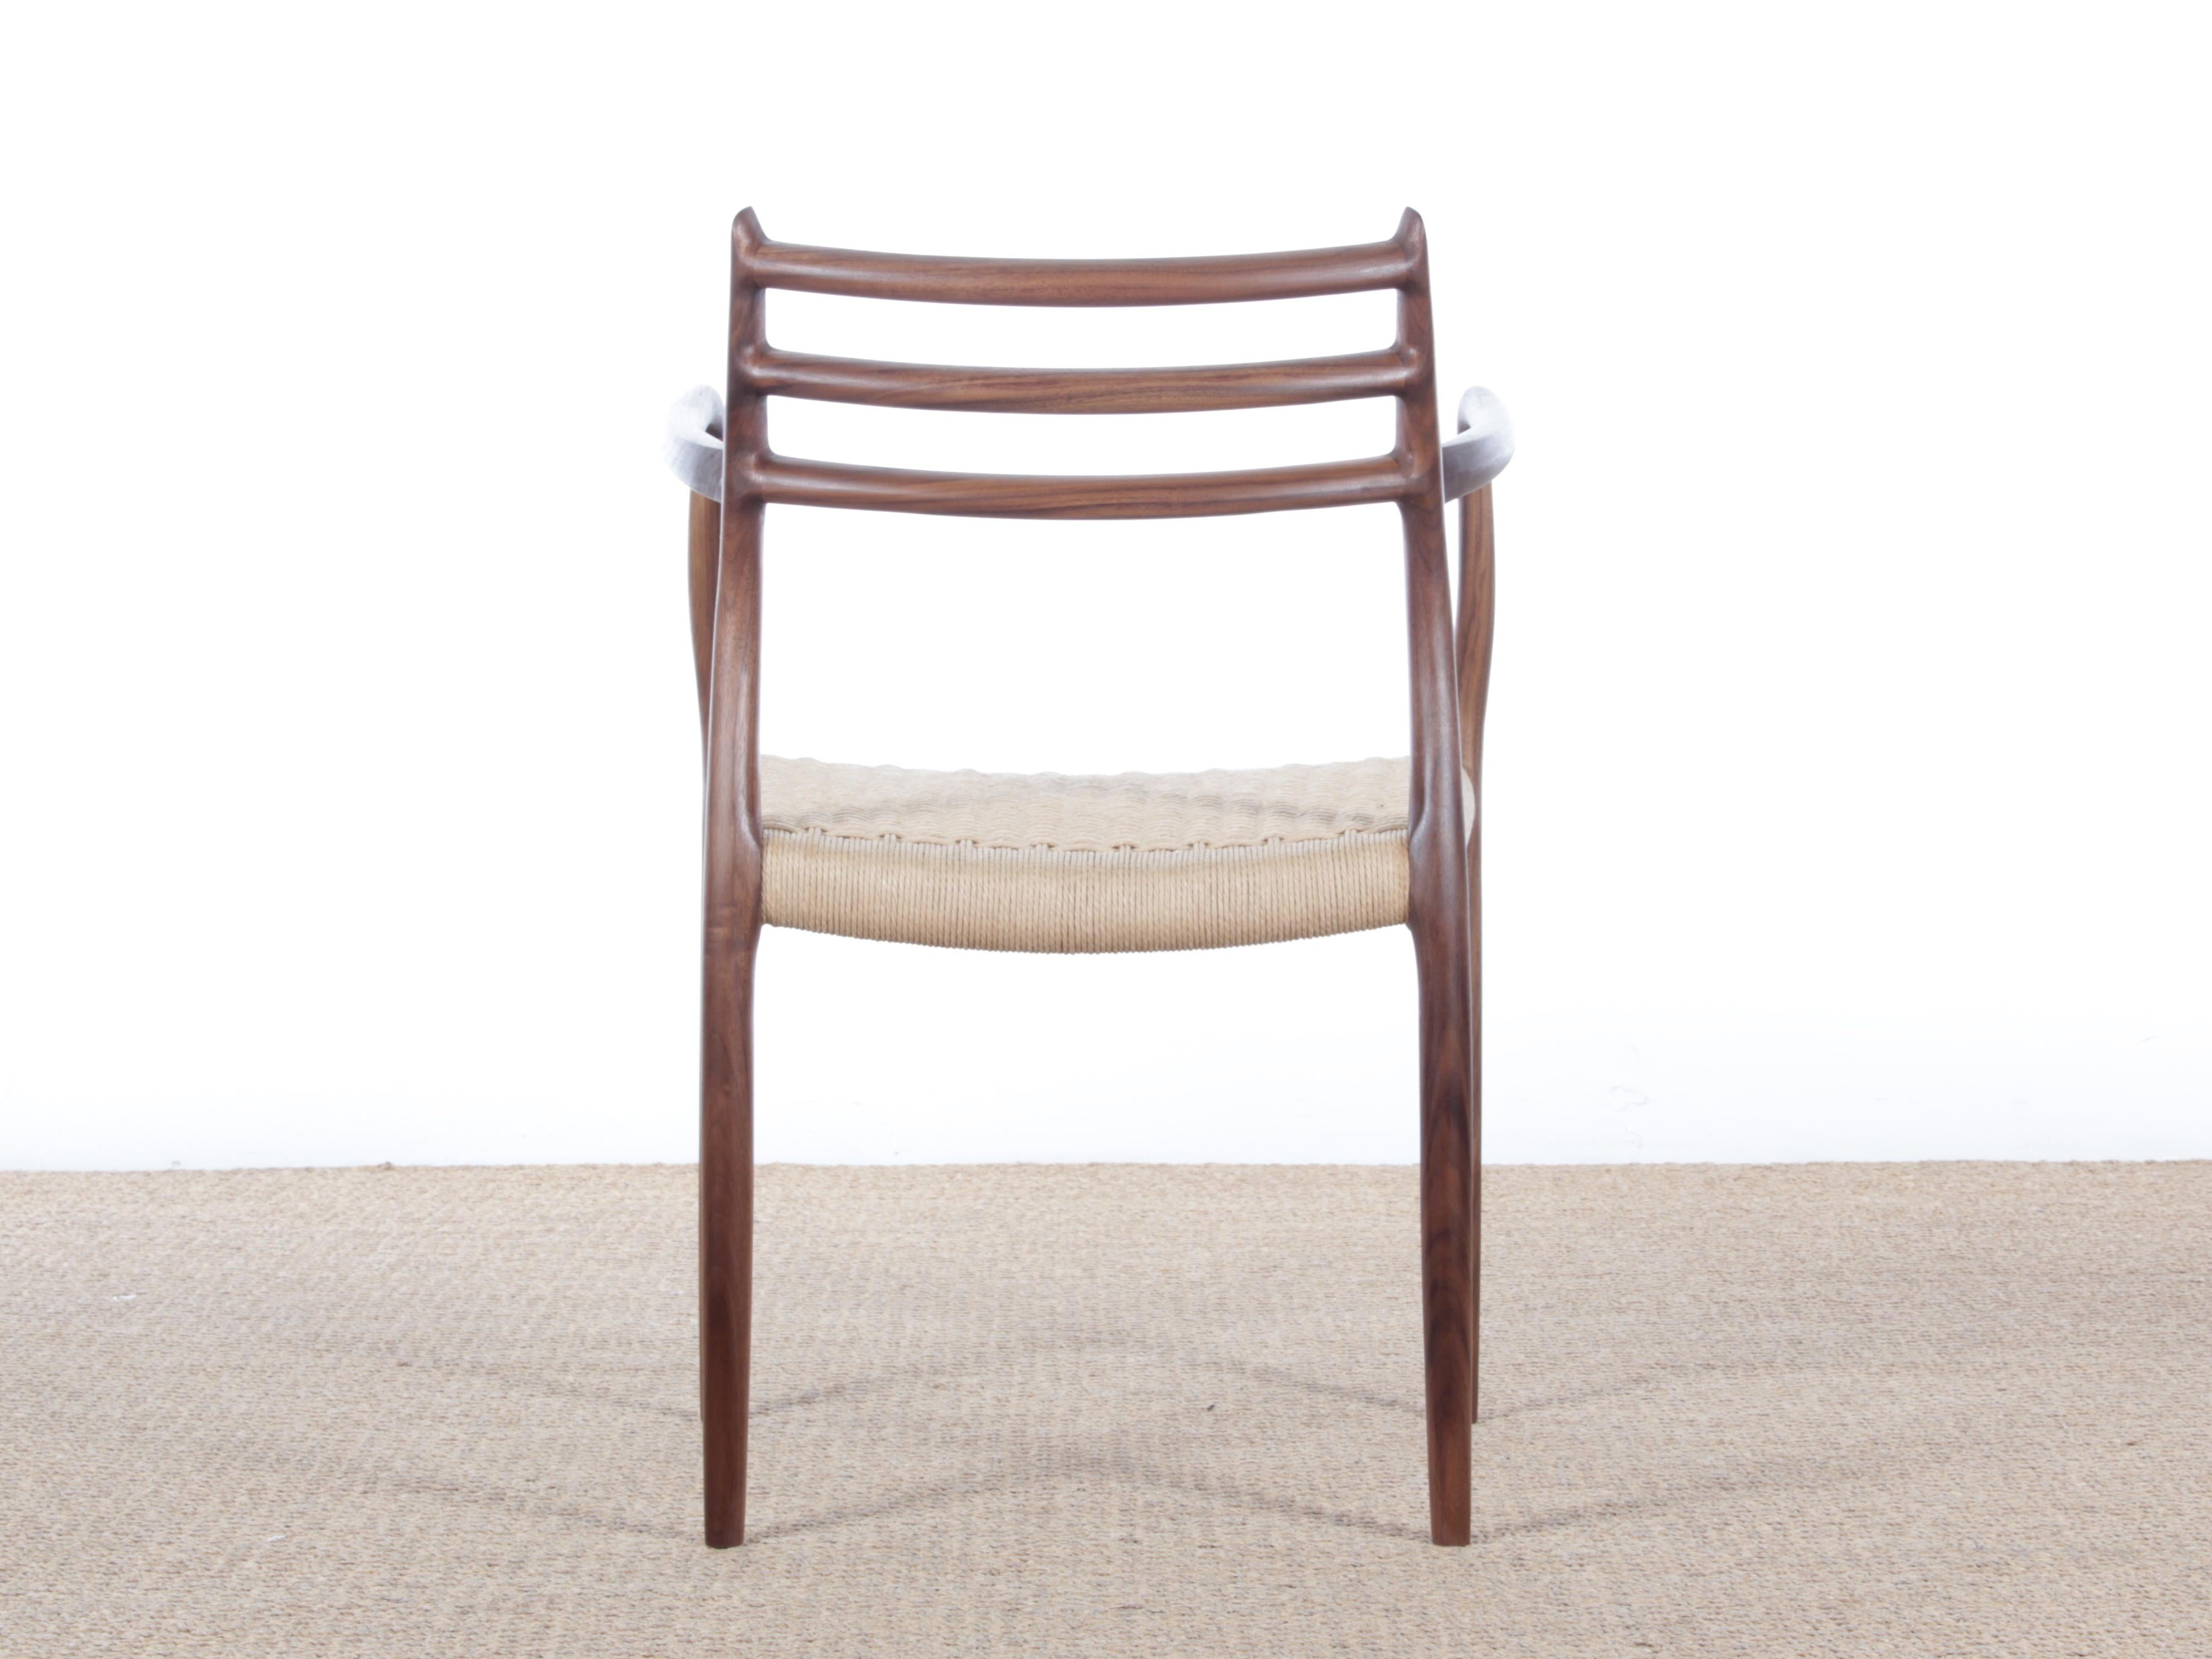 Mid-20th Century Mid-Century Modern Danish Armchair Model 62 by Niels O. Møller, New Production For Sale